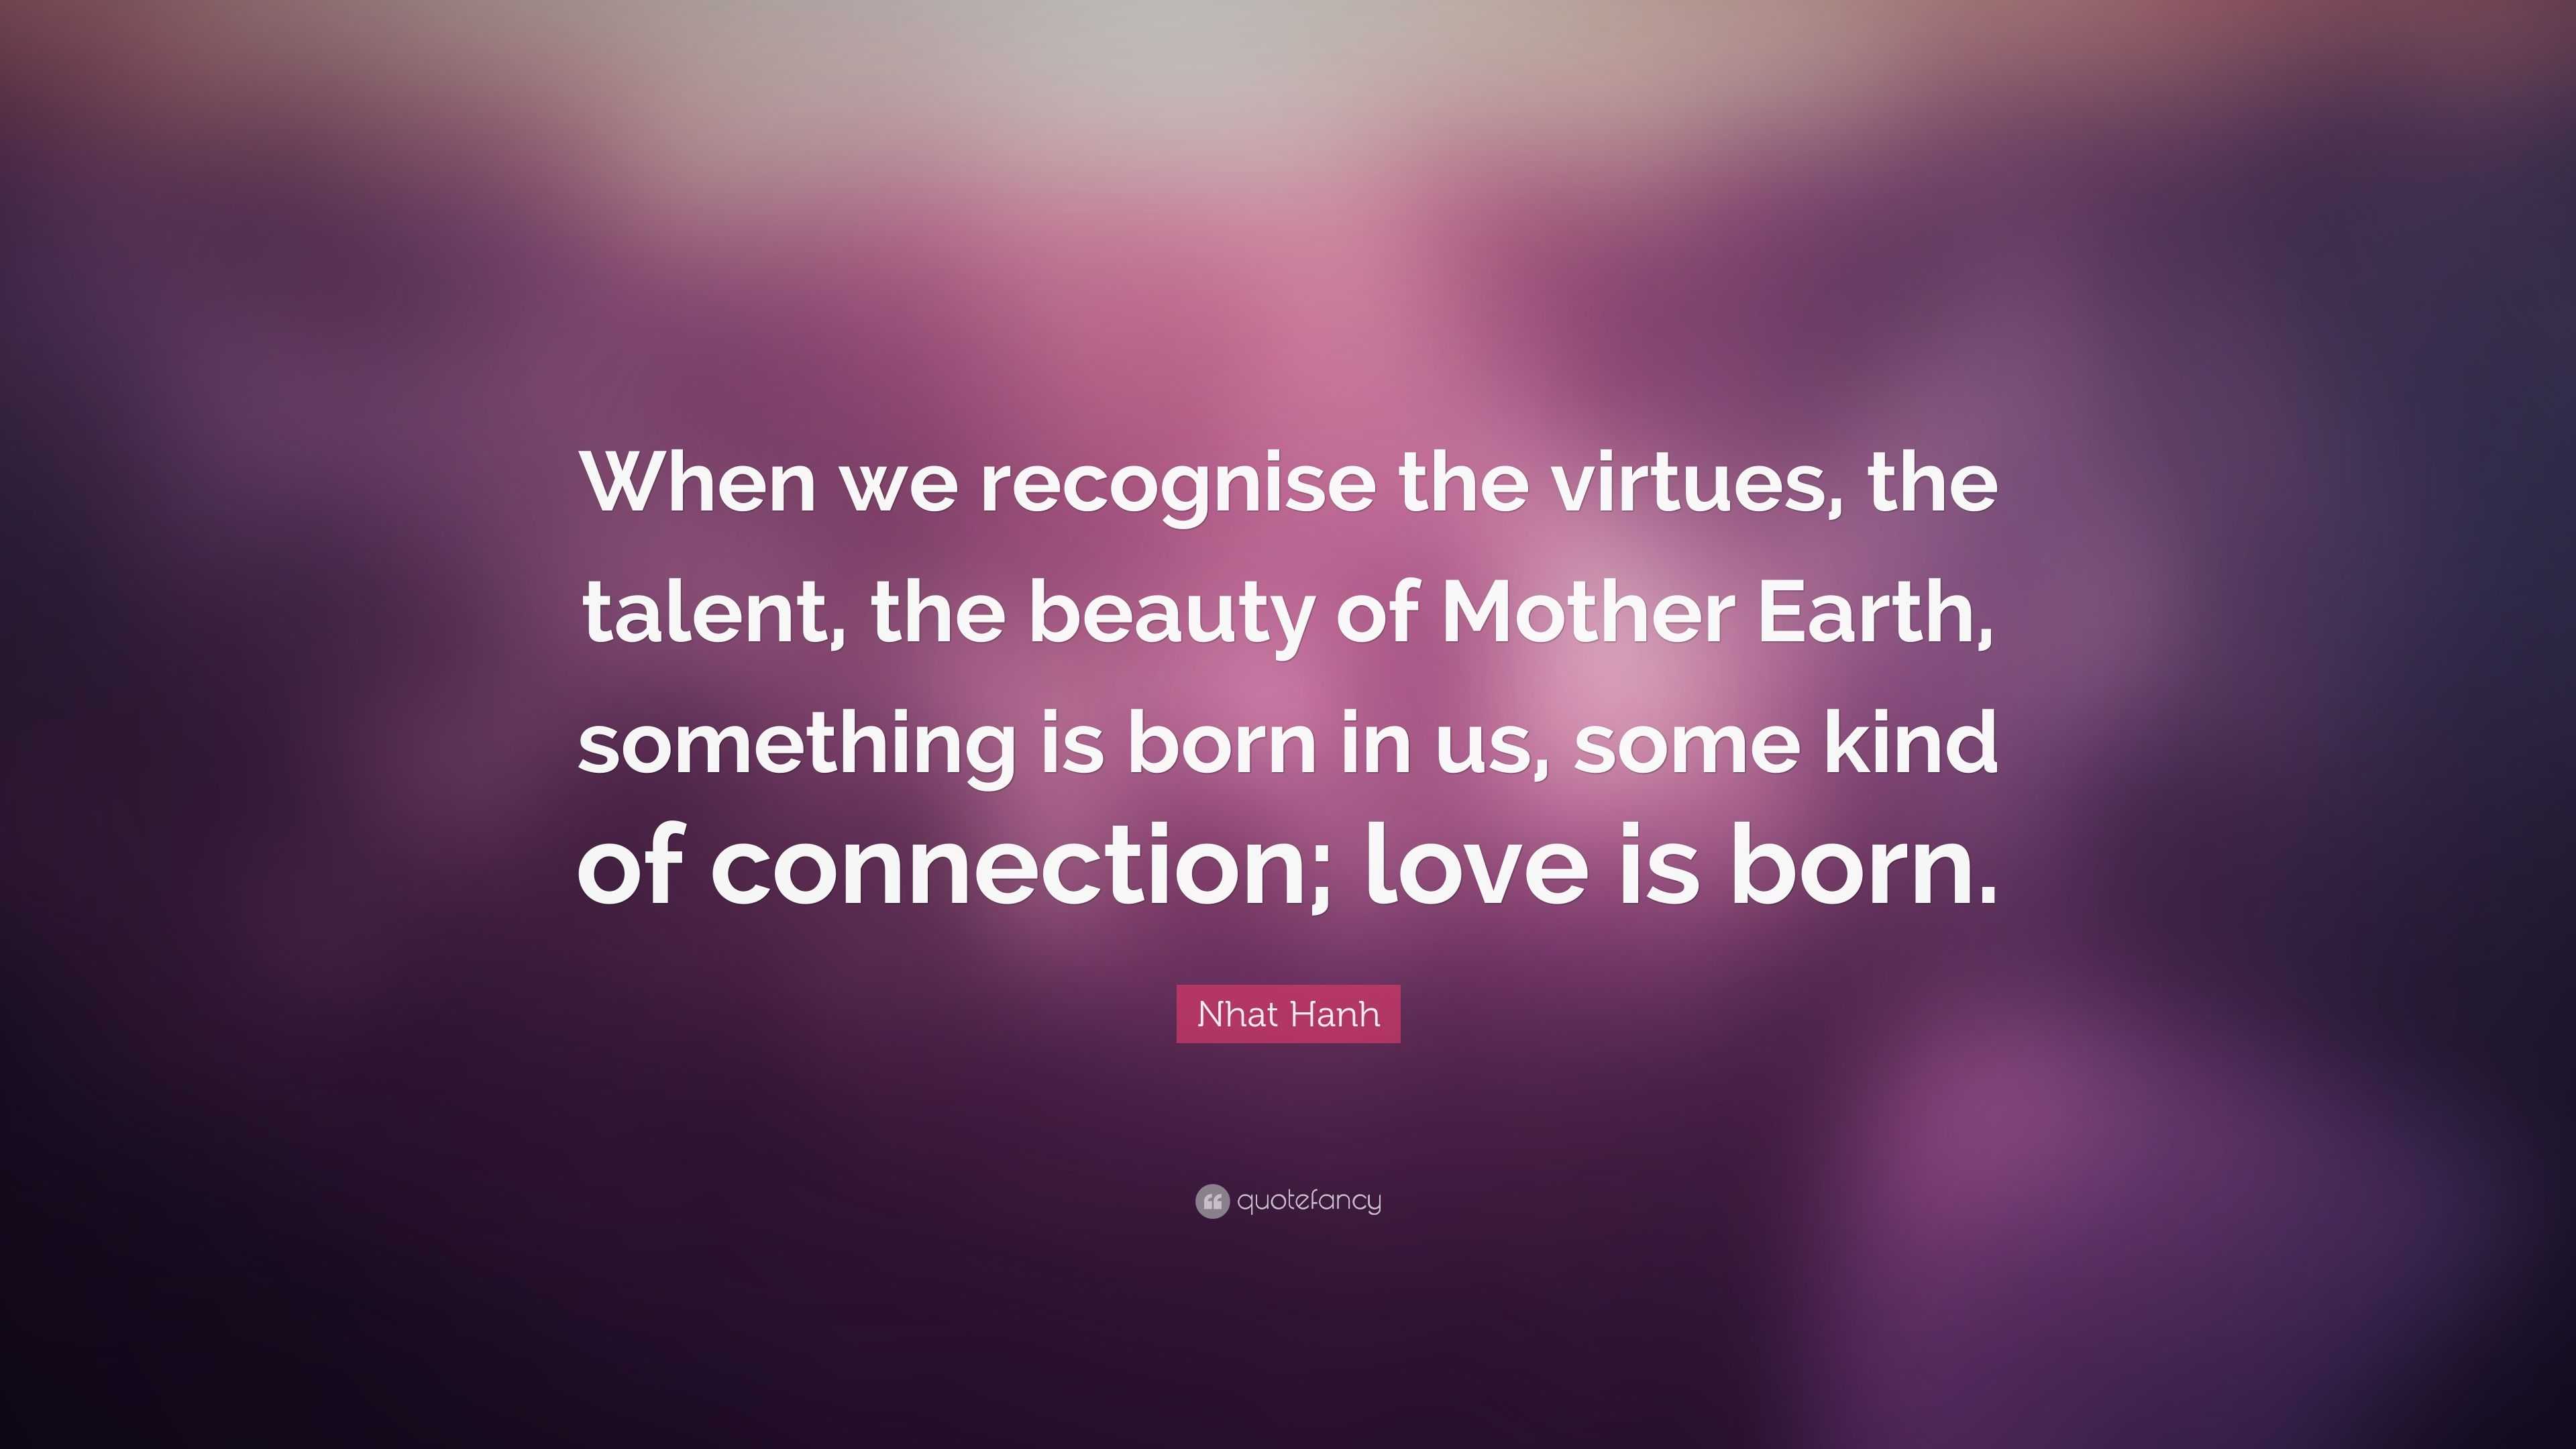 Nhat Hanh Quote “When we recognise the virtues the talent the beauty